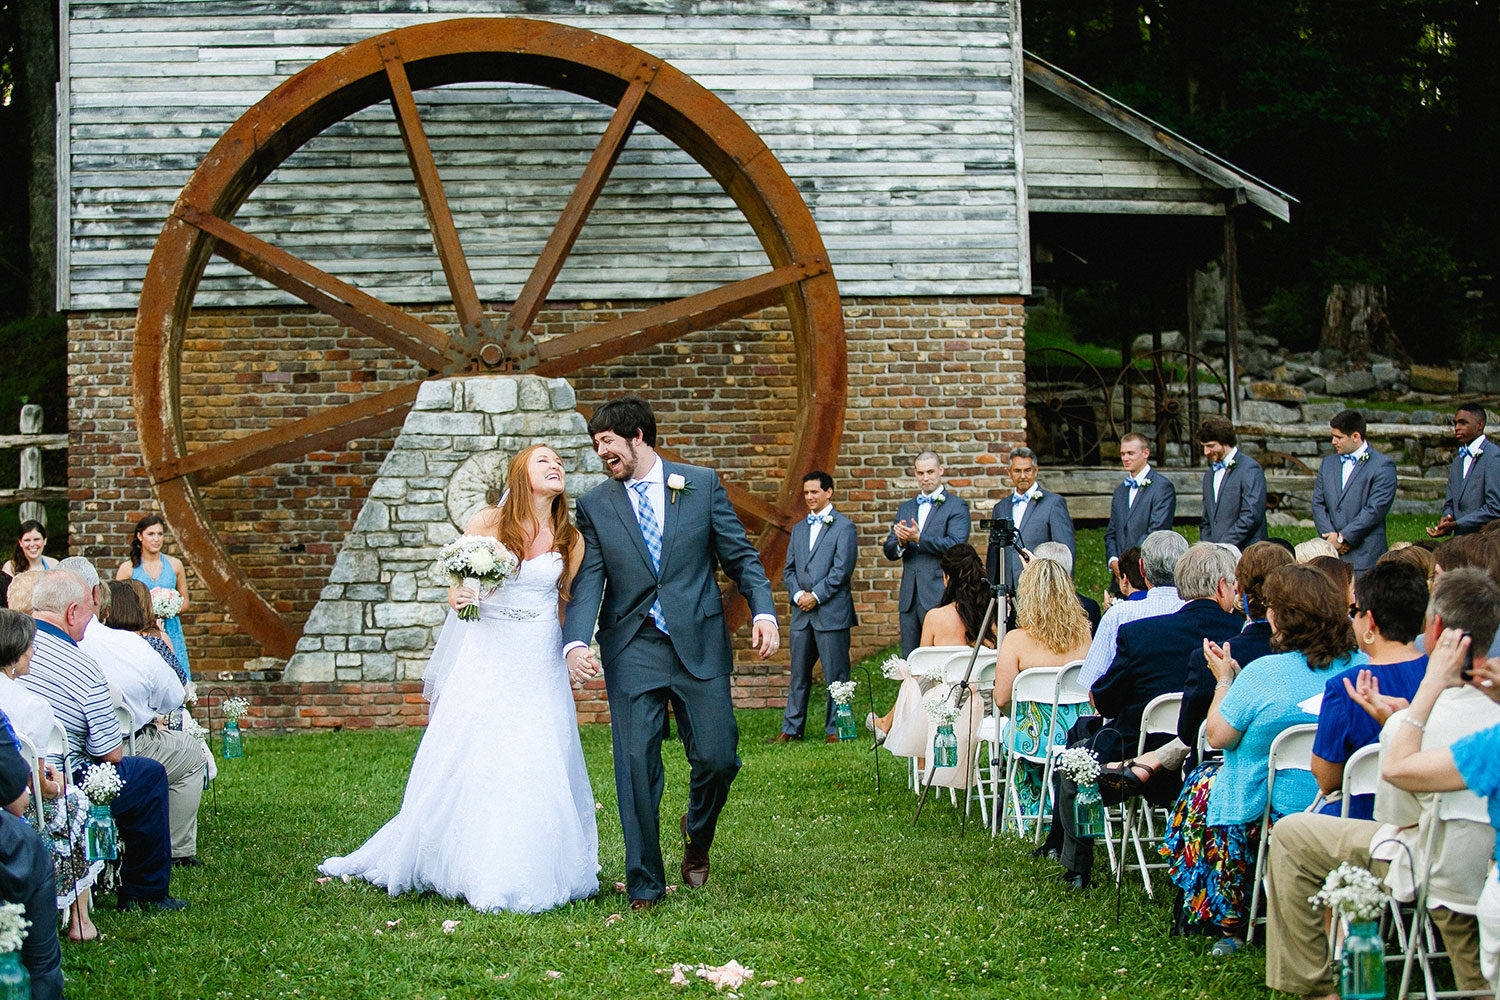 Ways to Make Your Groom Stand Out | Brittany Conner www.brittanyconner.com